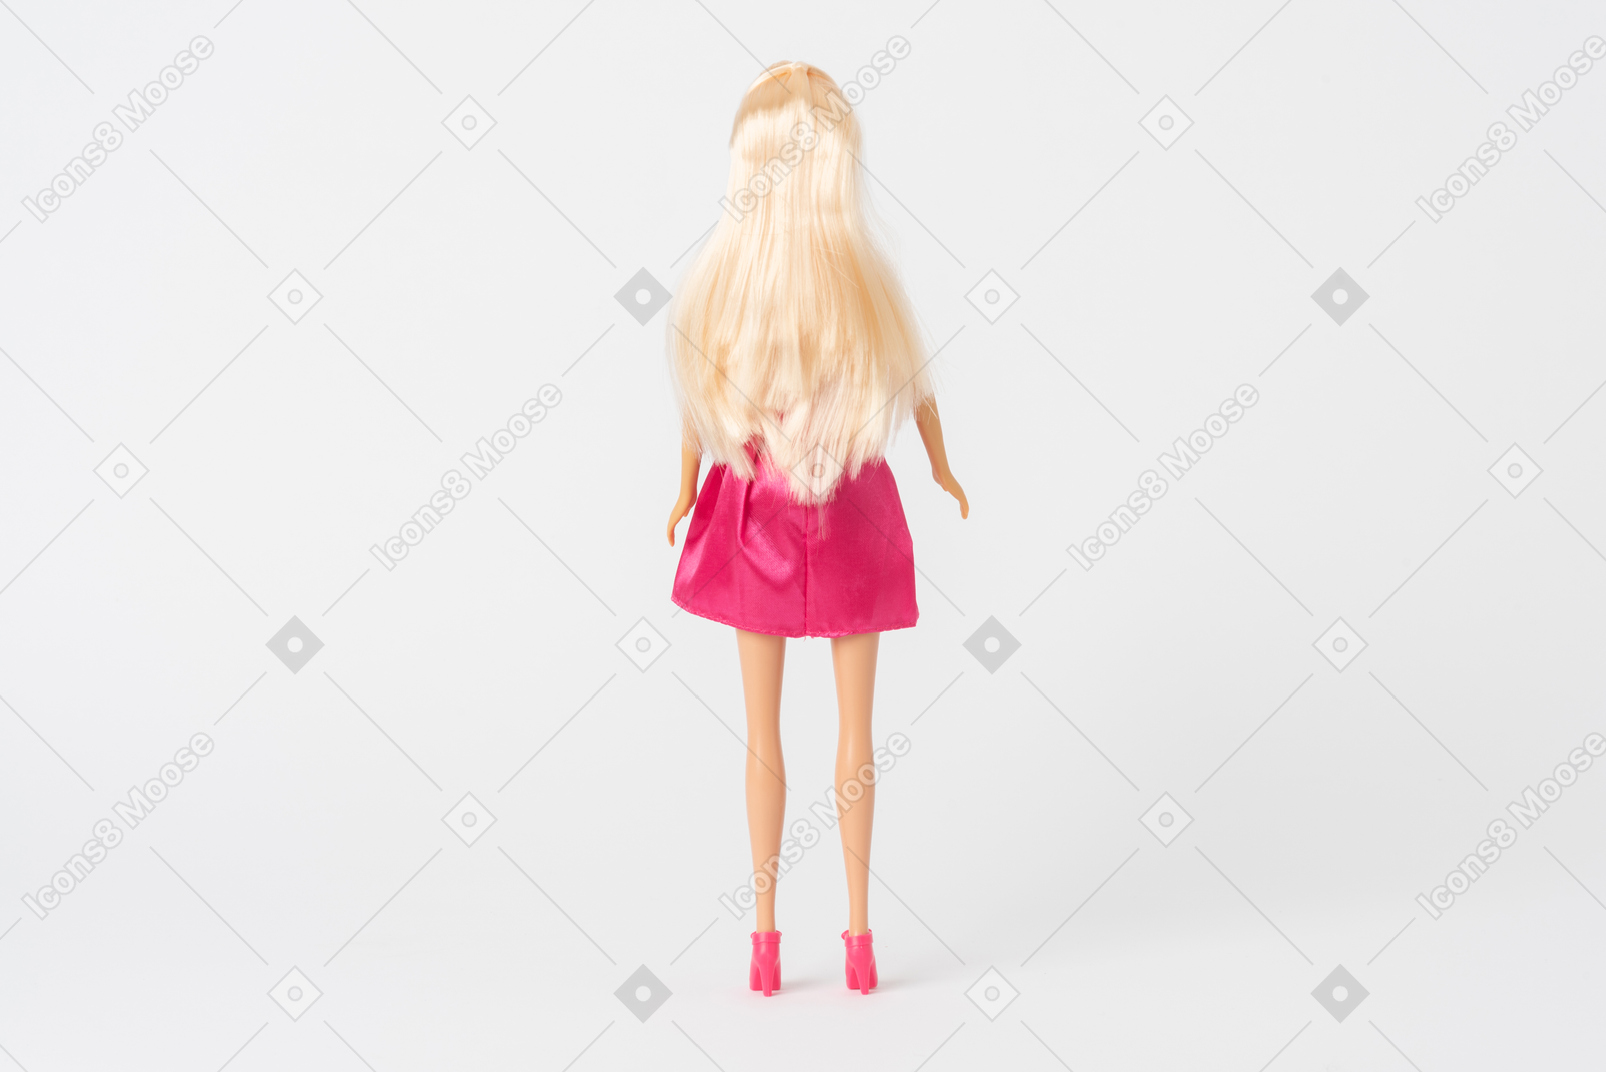 A back shot of a barbie doll in a shiny pink dress and pink high heels standing isolated against a plain white background